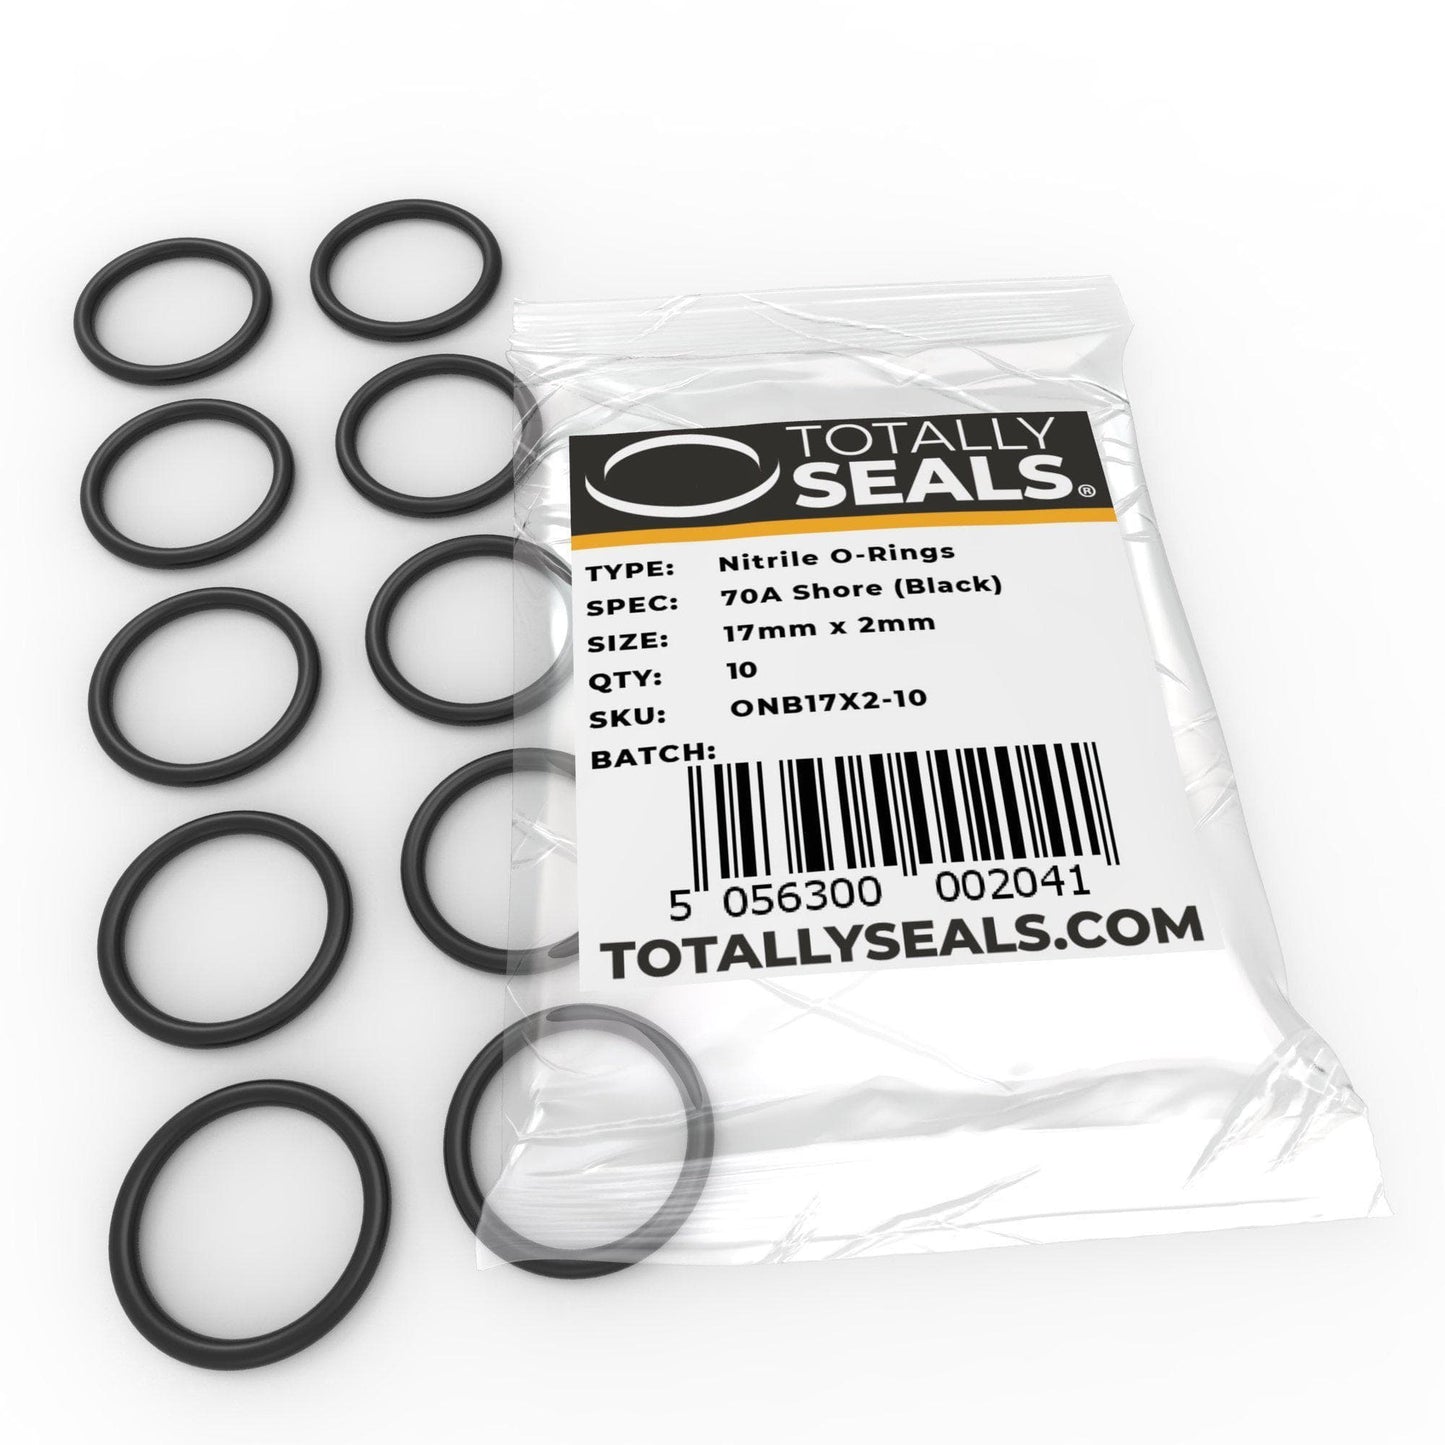 17mm x 2mm (21mm OD) Nitrile O-Rings - Totally Seals®